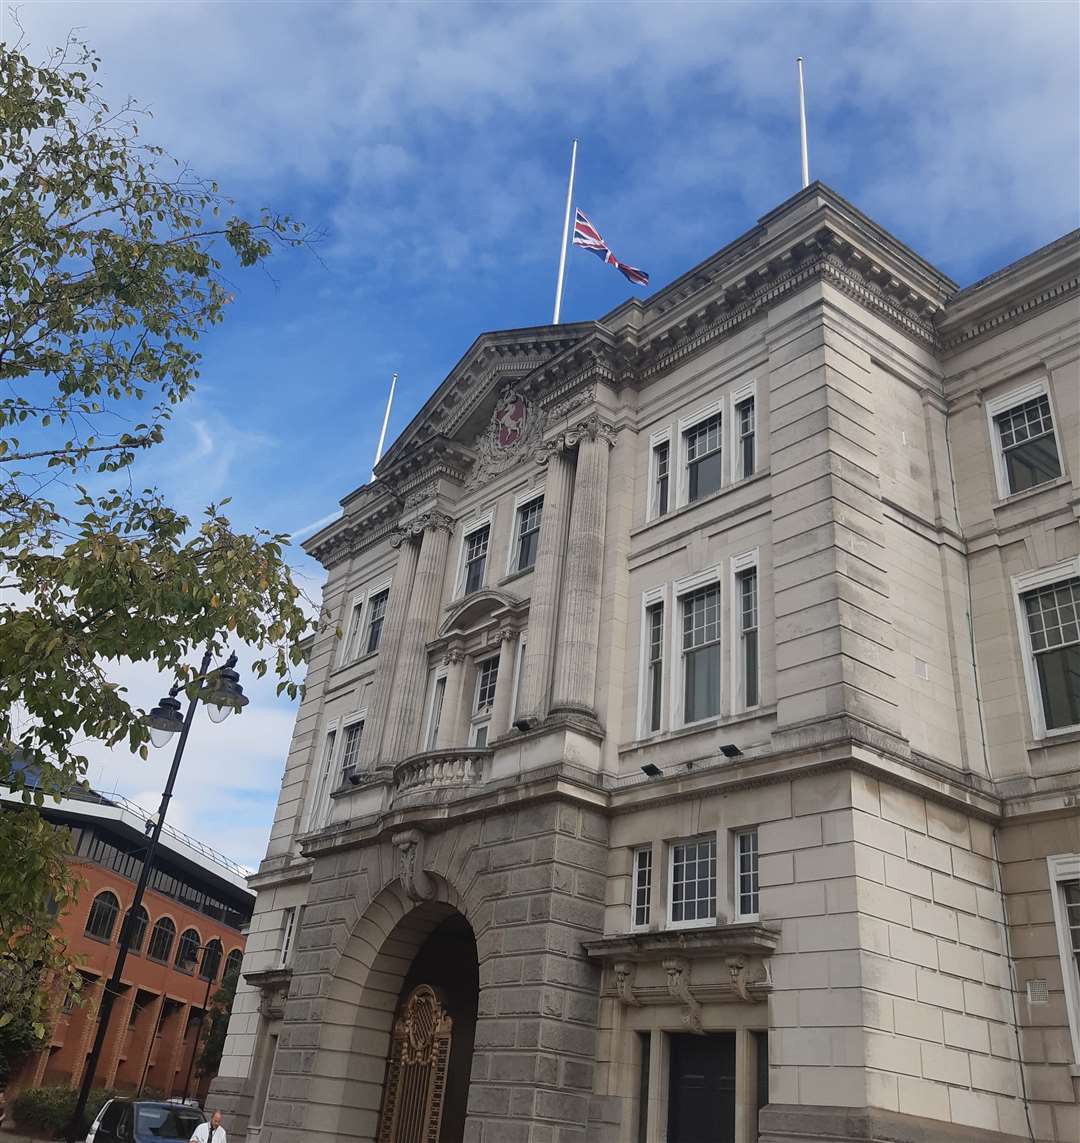 The flag at County Hall flies at half-mast for the Queen